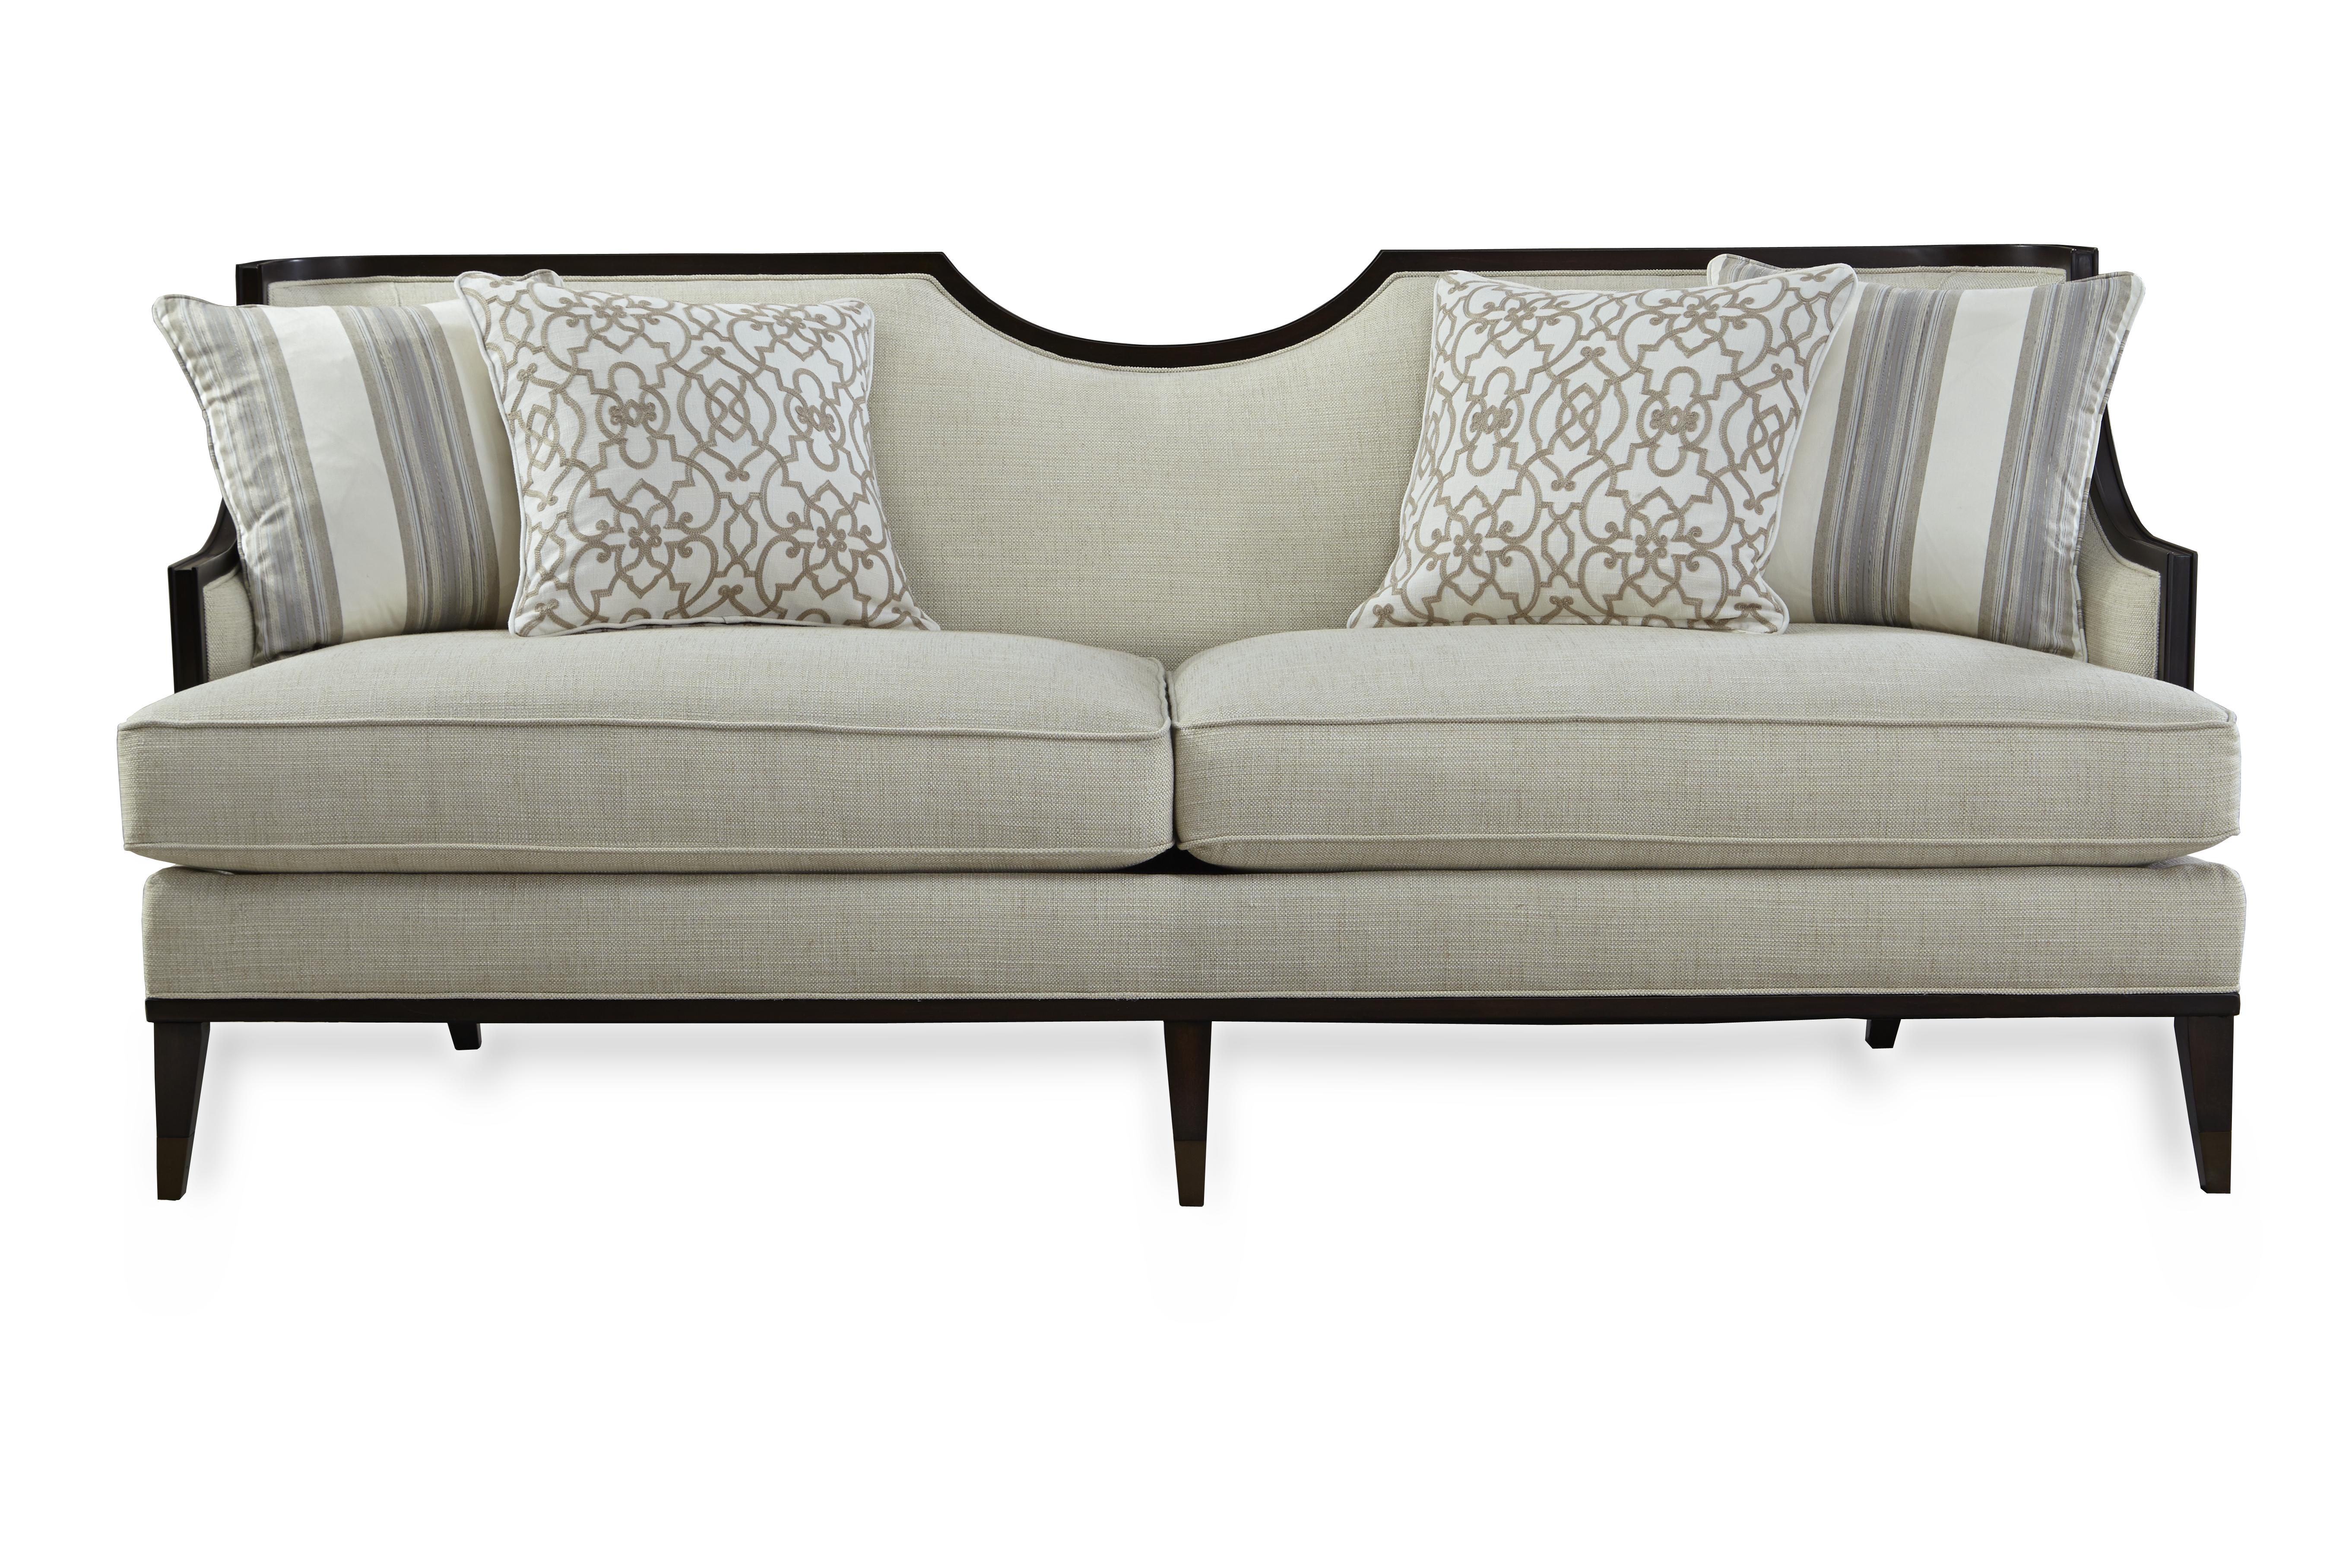 Classic, Traditional Sofa Intrigue Harper 161501-5336AA in Ivory Fabric